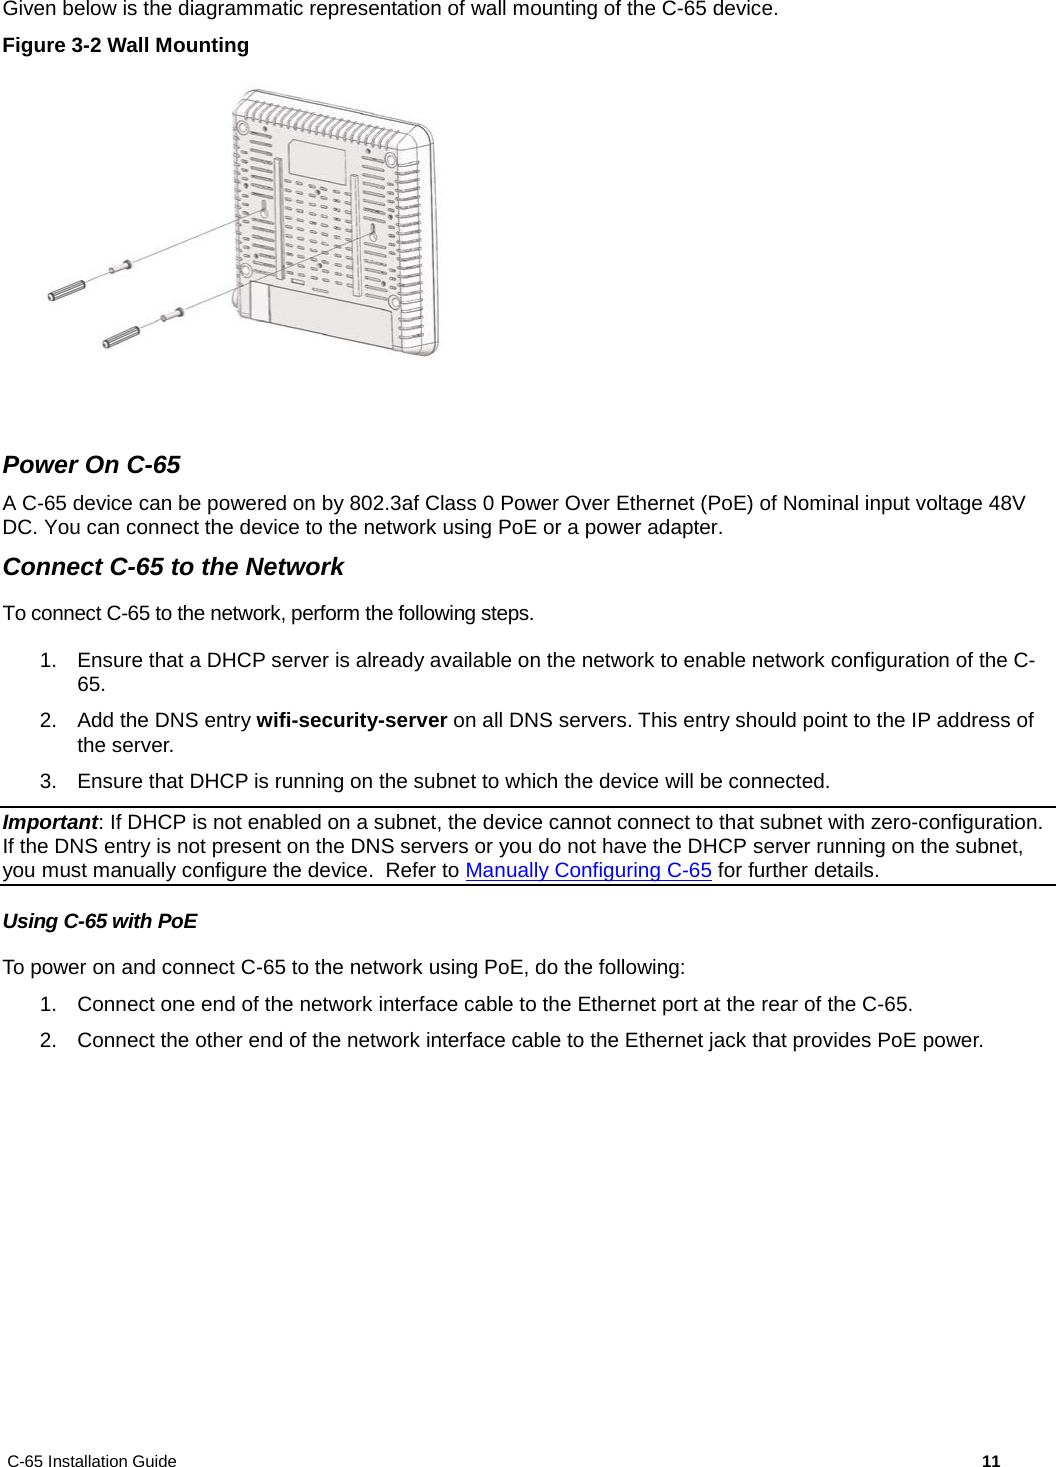 C-65 Installation Guide        11  Given below is the diagrammatic representation of wall mounting of the C-65 device. Figure 3-2 Wall Mounting   Power On C-65 A C-65 device can be powered on by 802.3af Class 0 Power Over Ethernet (PoE) of Nominal input voltage 48V DC. You can connect the device to the network using PoE or a power adapter. Connect C-65 to the Network To connect C-65 to the network, perform the following steps. 1. Ensure that a DHCP server is already available on the network to enable network configuration of the C-65. 2. Add the DNS entry wifi-security-server on all DNS servers. This entry should point to the IP address of the server.  3. Ensure that DHCP is running on the subnet to which the device will be connected. Important: If DHCP is not enabled on a subnet, the device cannot connect to that subnet with zero-configuration. If the DNS entry is not present on the DNS servers or you do not have the DHCP server running on the subnet, you must manually configure the device.  Refer to Manually Configuring C-65 for further details. Using C-65 with PoE To power on and connect C-65 to the network using PoE, do the following: 1. Connect one end of the network interface cable to the Ethernet port at the rear of the C-65. 2. Connect the other end of the network interface cable to the Ethernet jack that provides PoE power. 